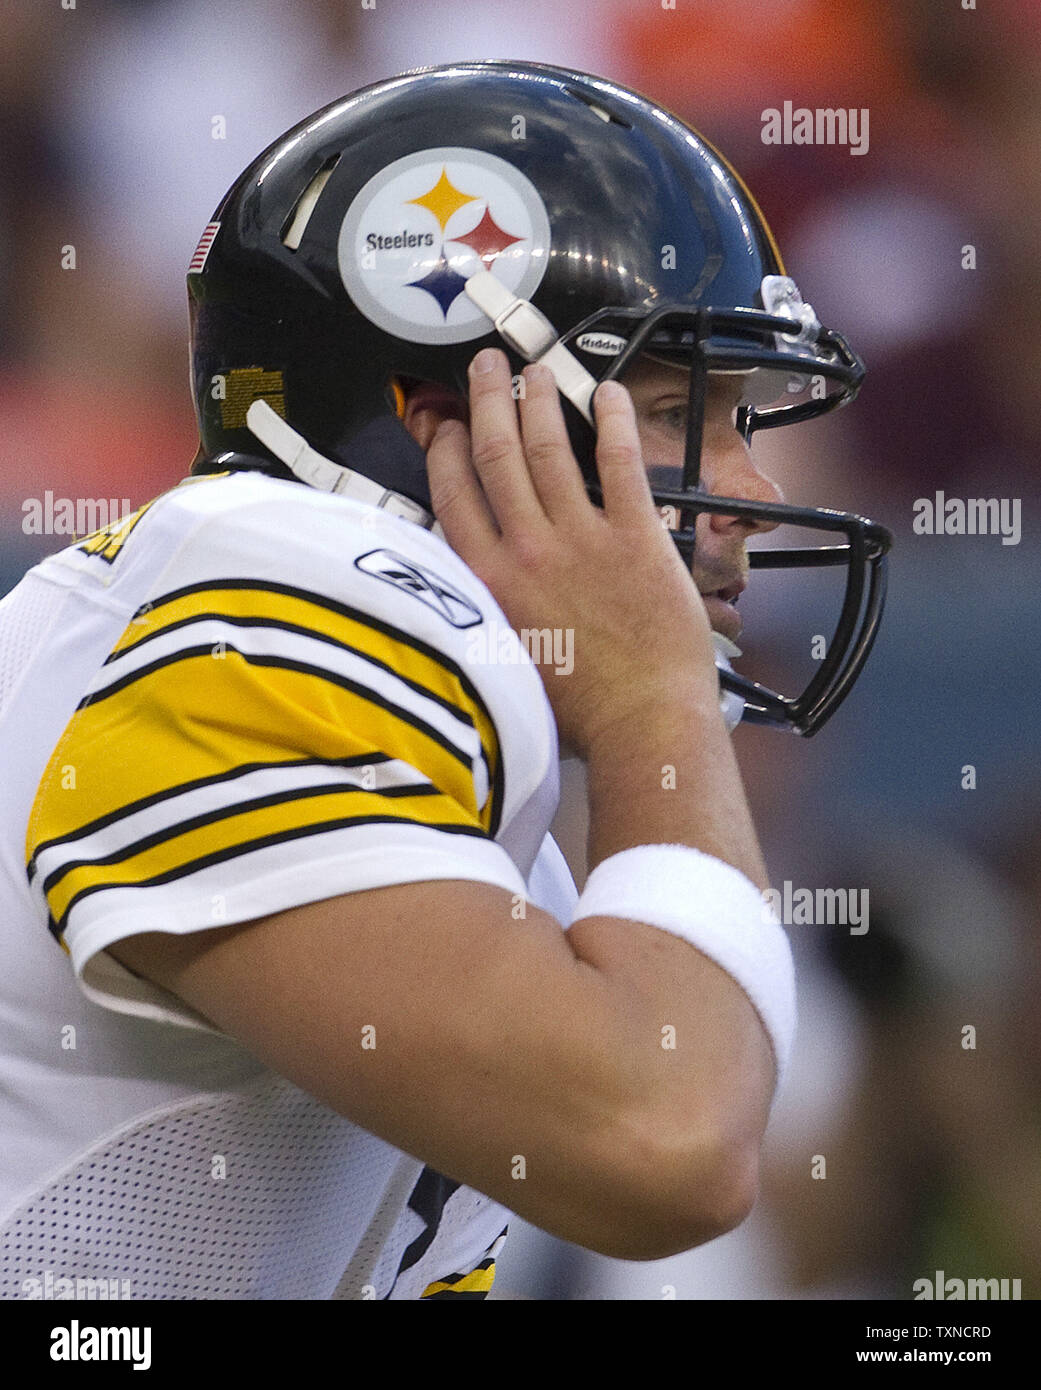 Pittsburgh Steelers quarterback Ben Roethlisberger tries to hear a play call during the first quarter against the Denver Broncos at Invesco Field at Mile High on August 29, 2010 in Denver.  UPI/Gary C. Caskey Stock Photo